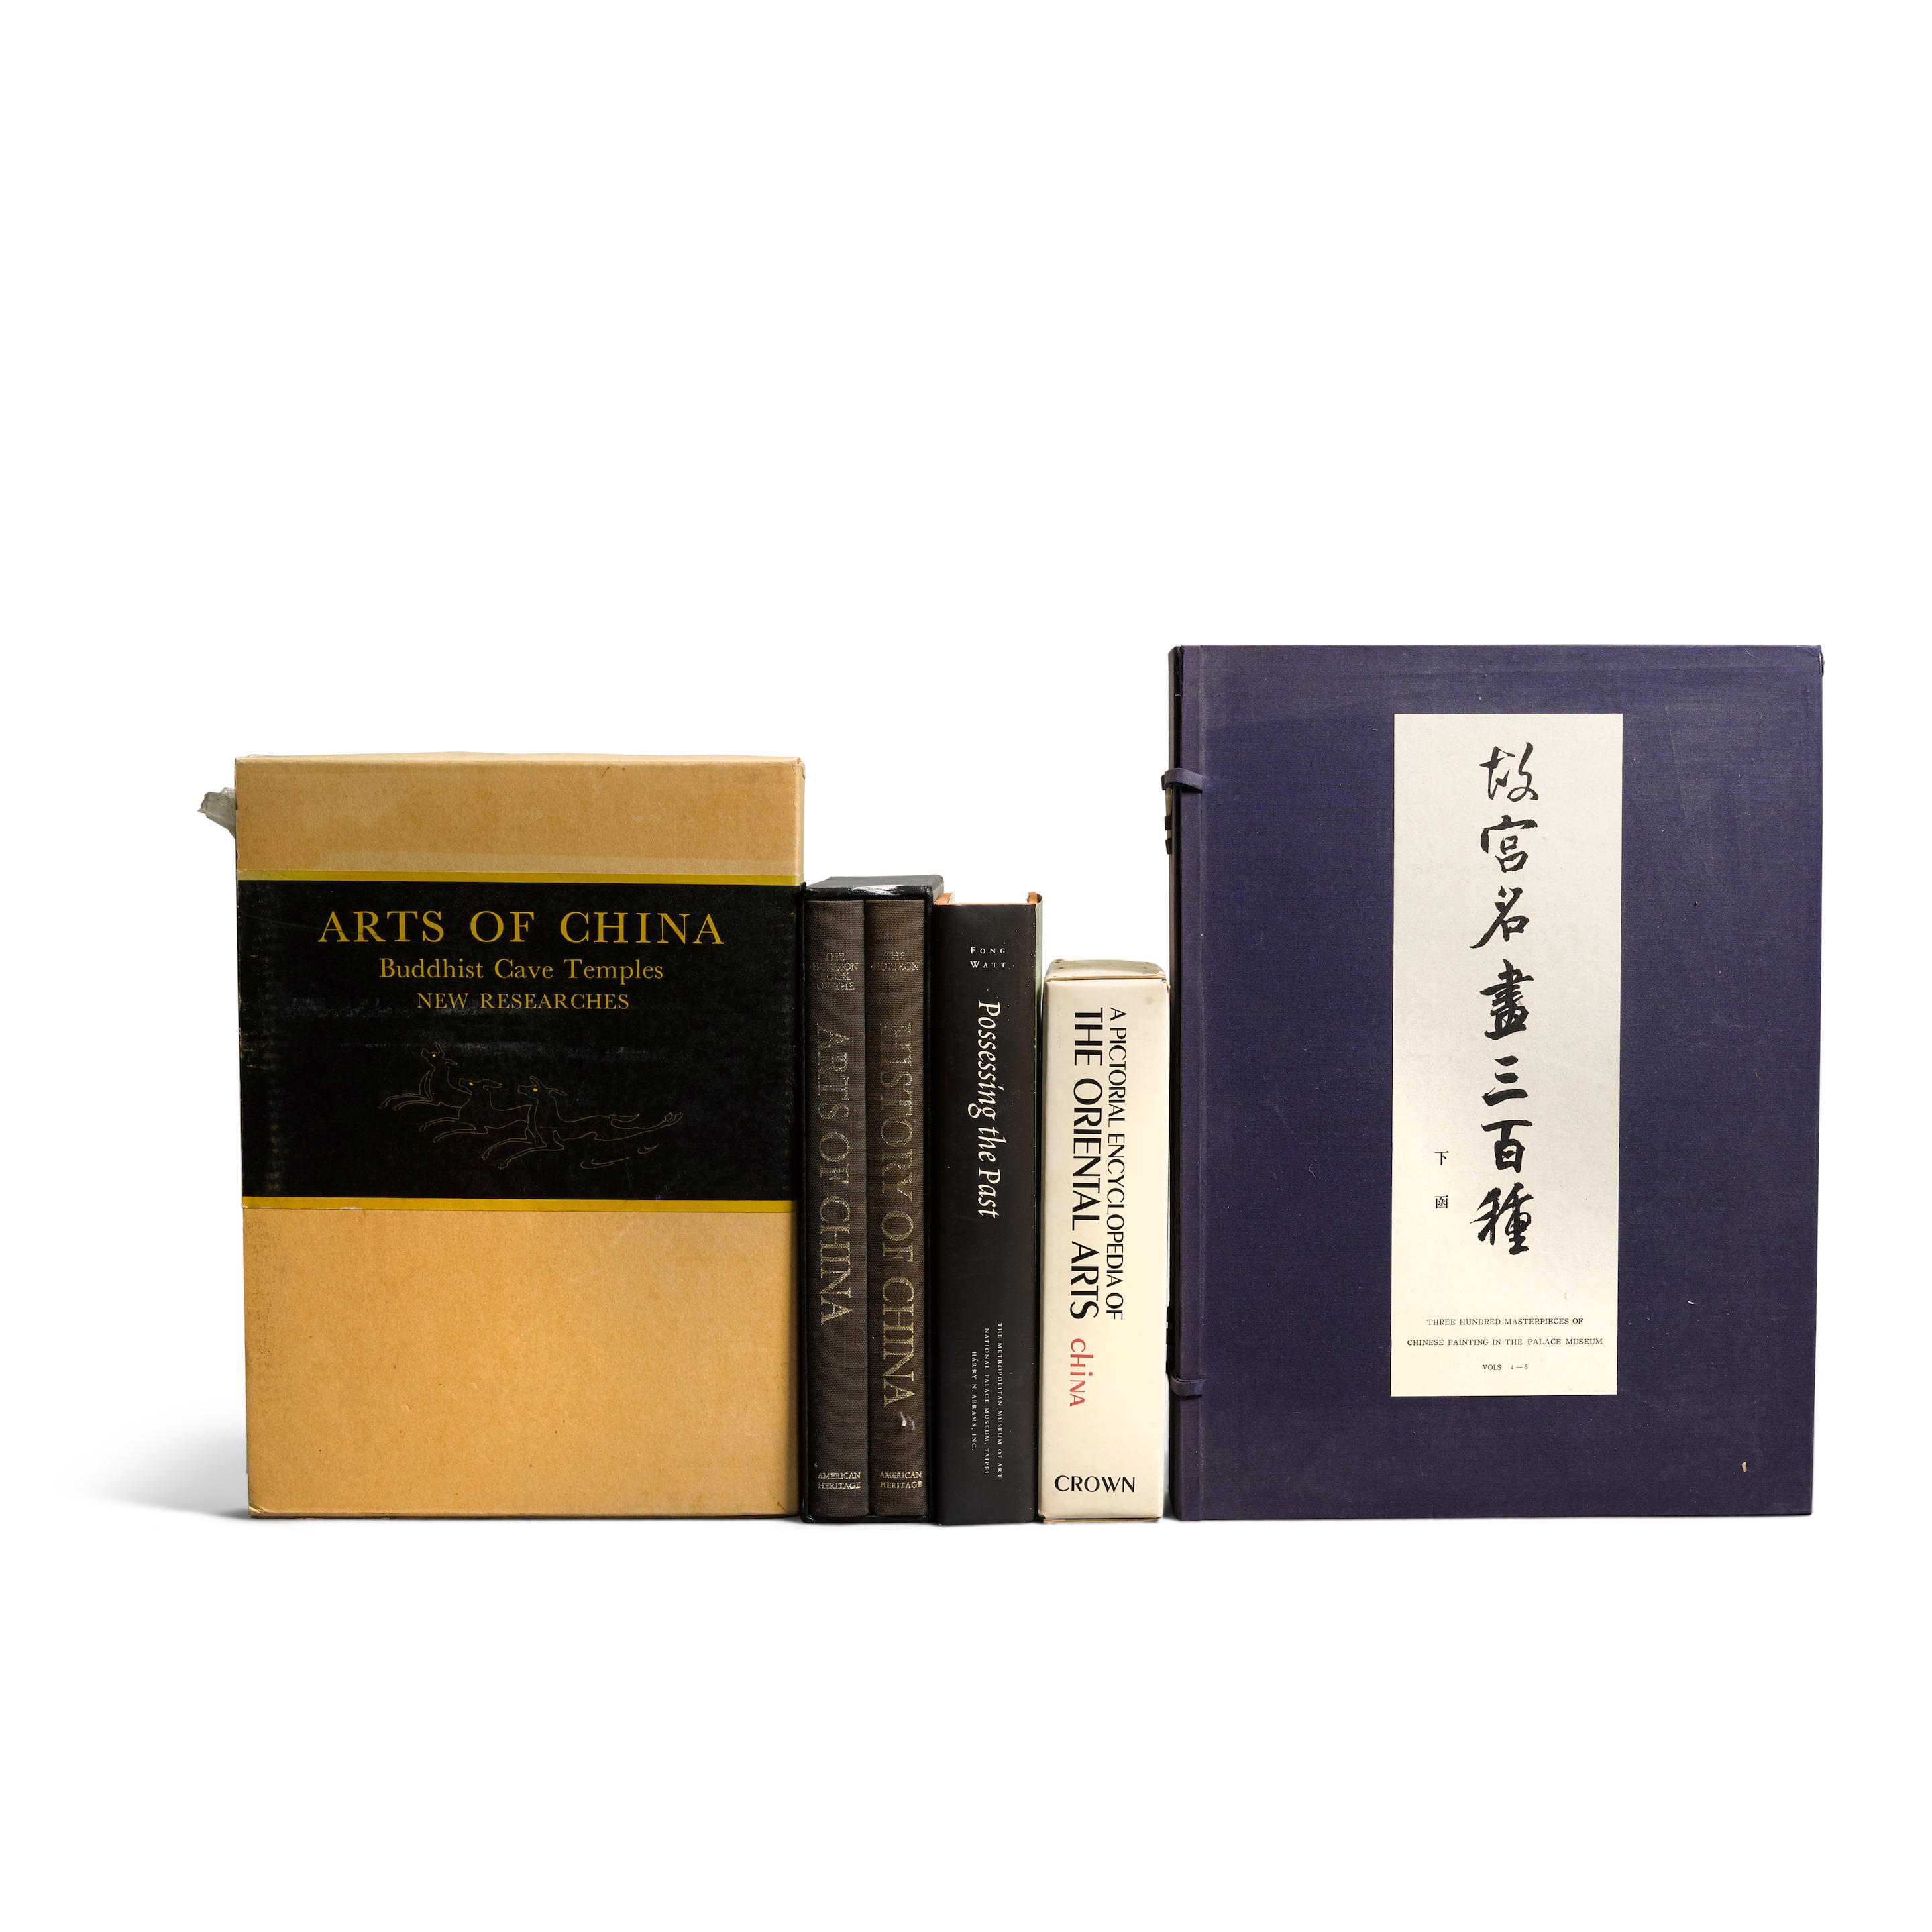 A GROUP OF TWENTY-NINE CHINESE ART AND HISTORICAL REFERENCE BOOKS